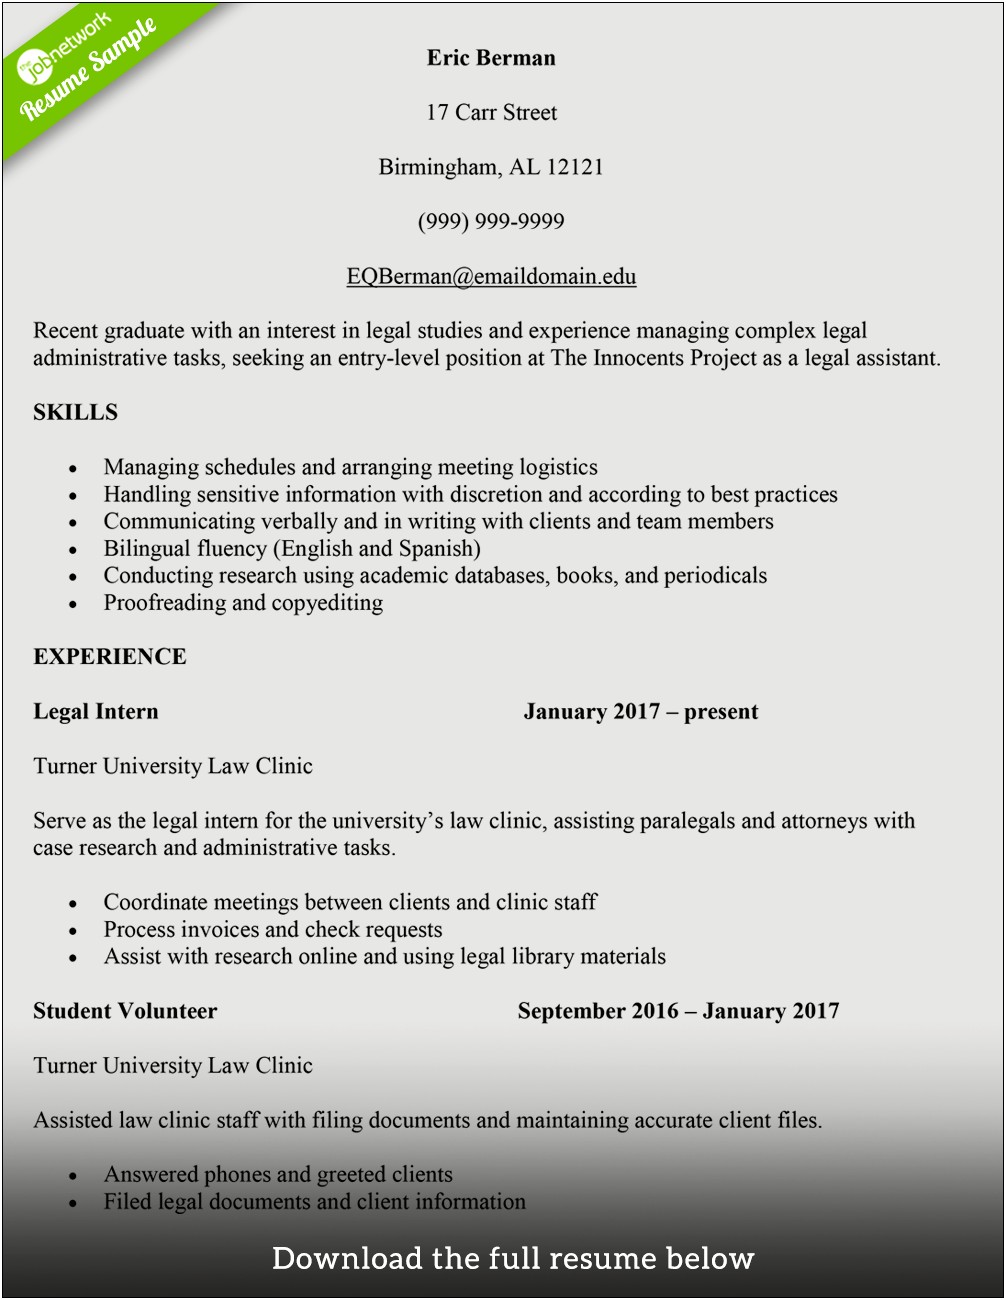 Resume Skills For Legal Assistant